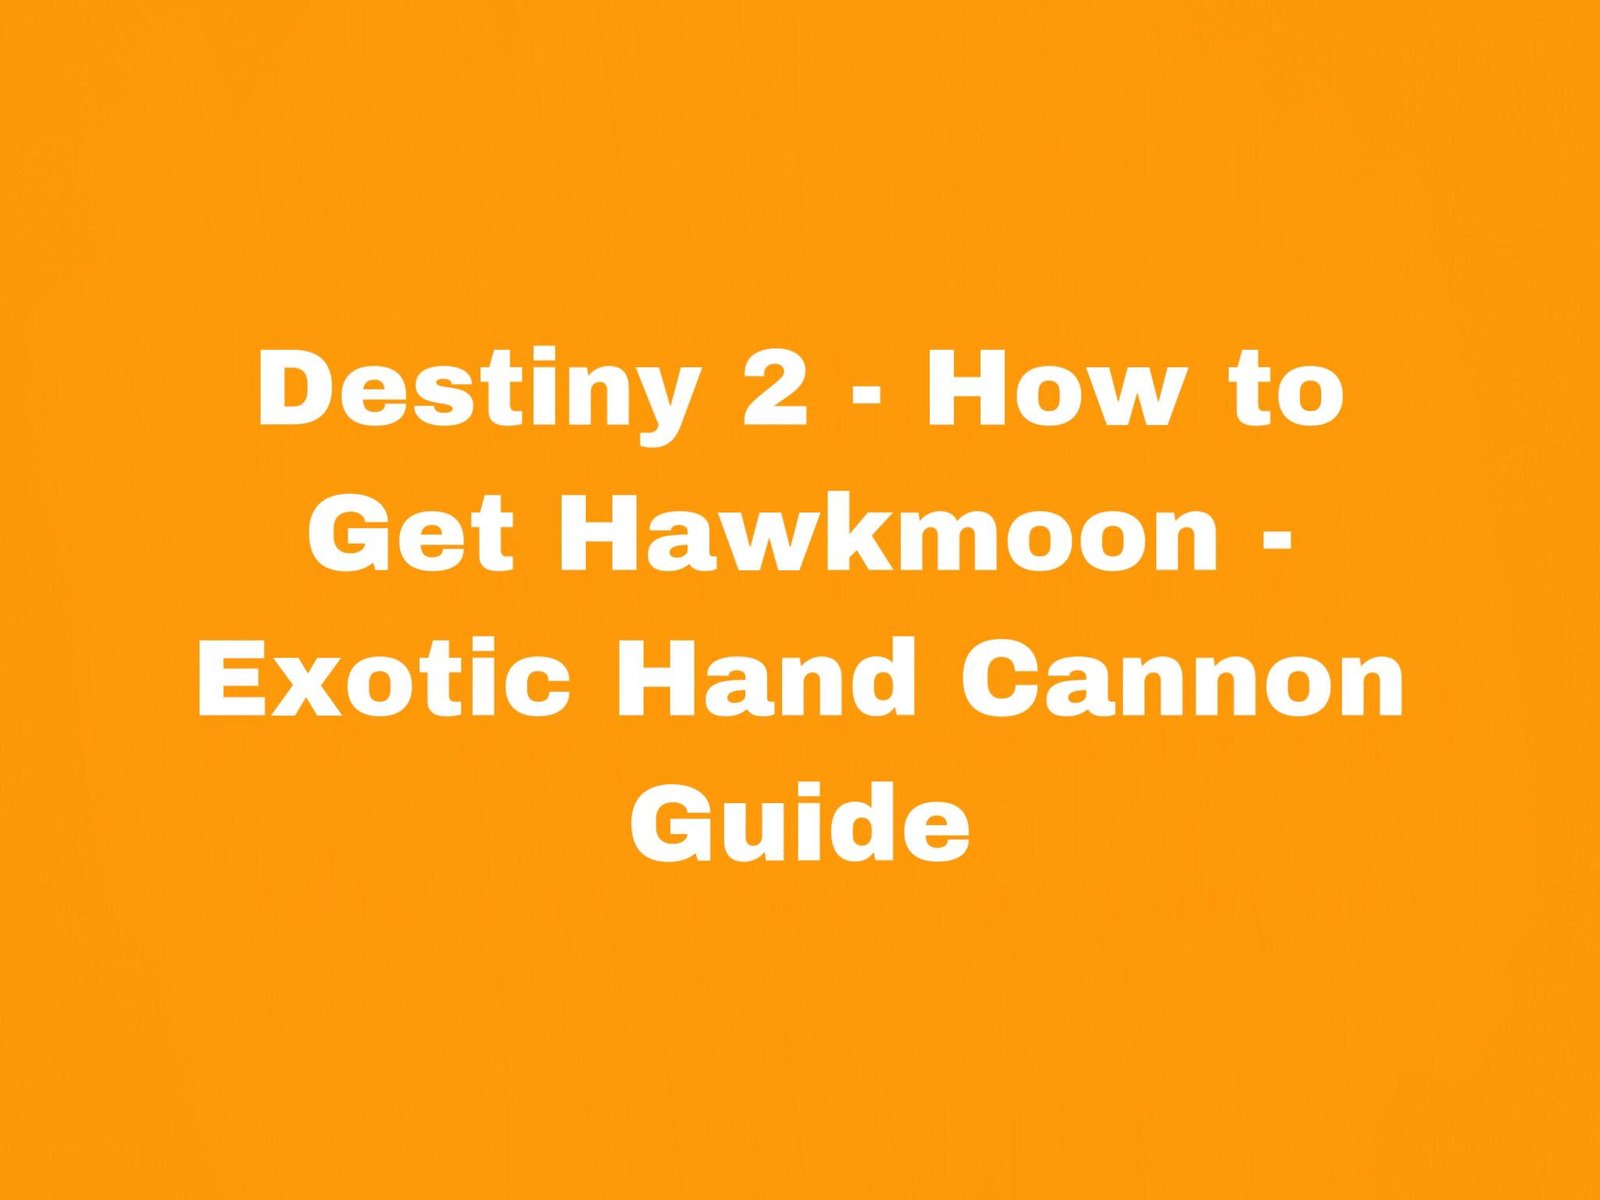 Destiny 2 - How to Get Hawkmoon